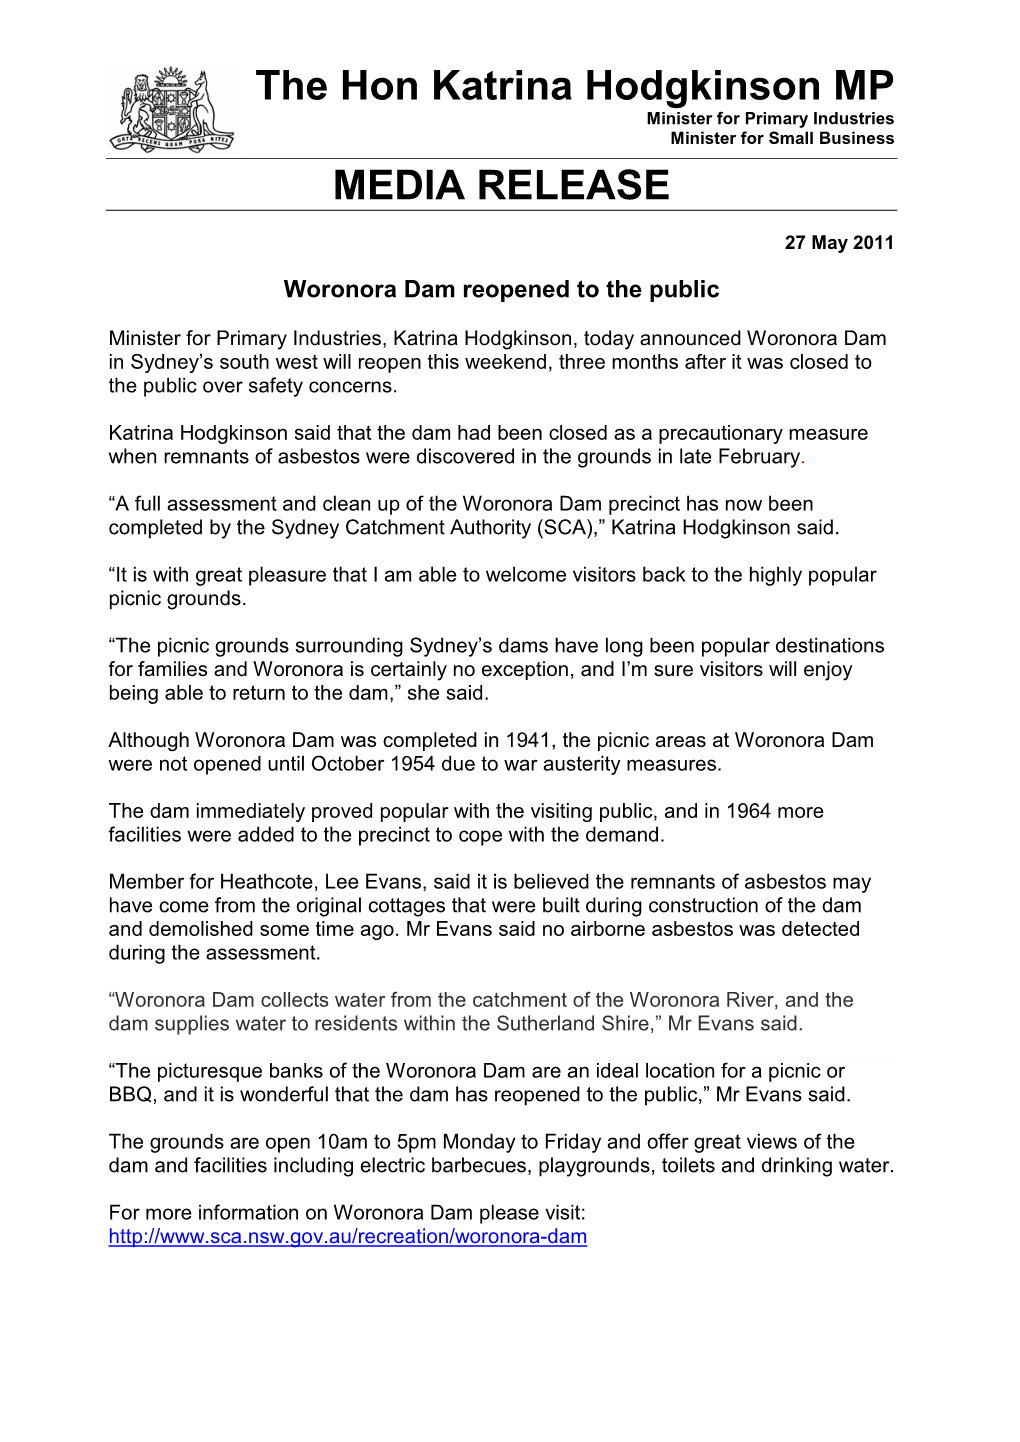 Woronora Dam Reopened to the Public